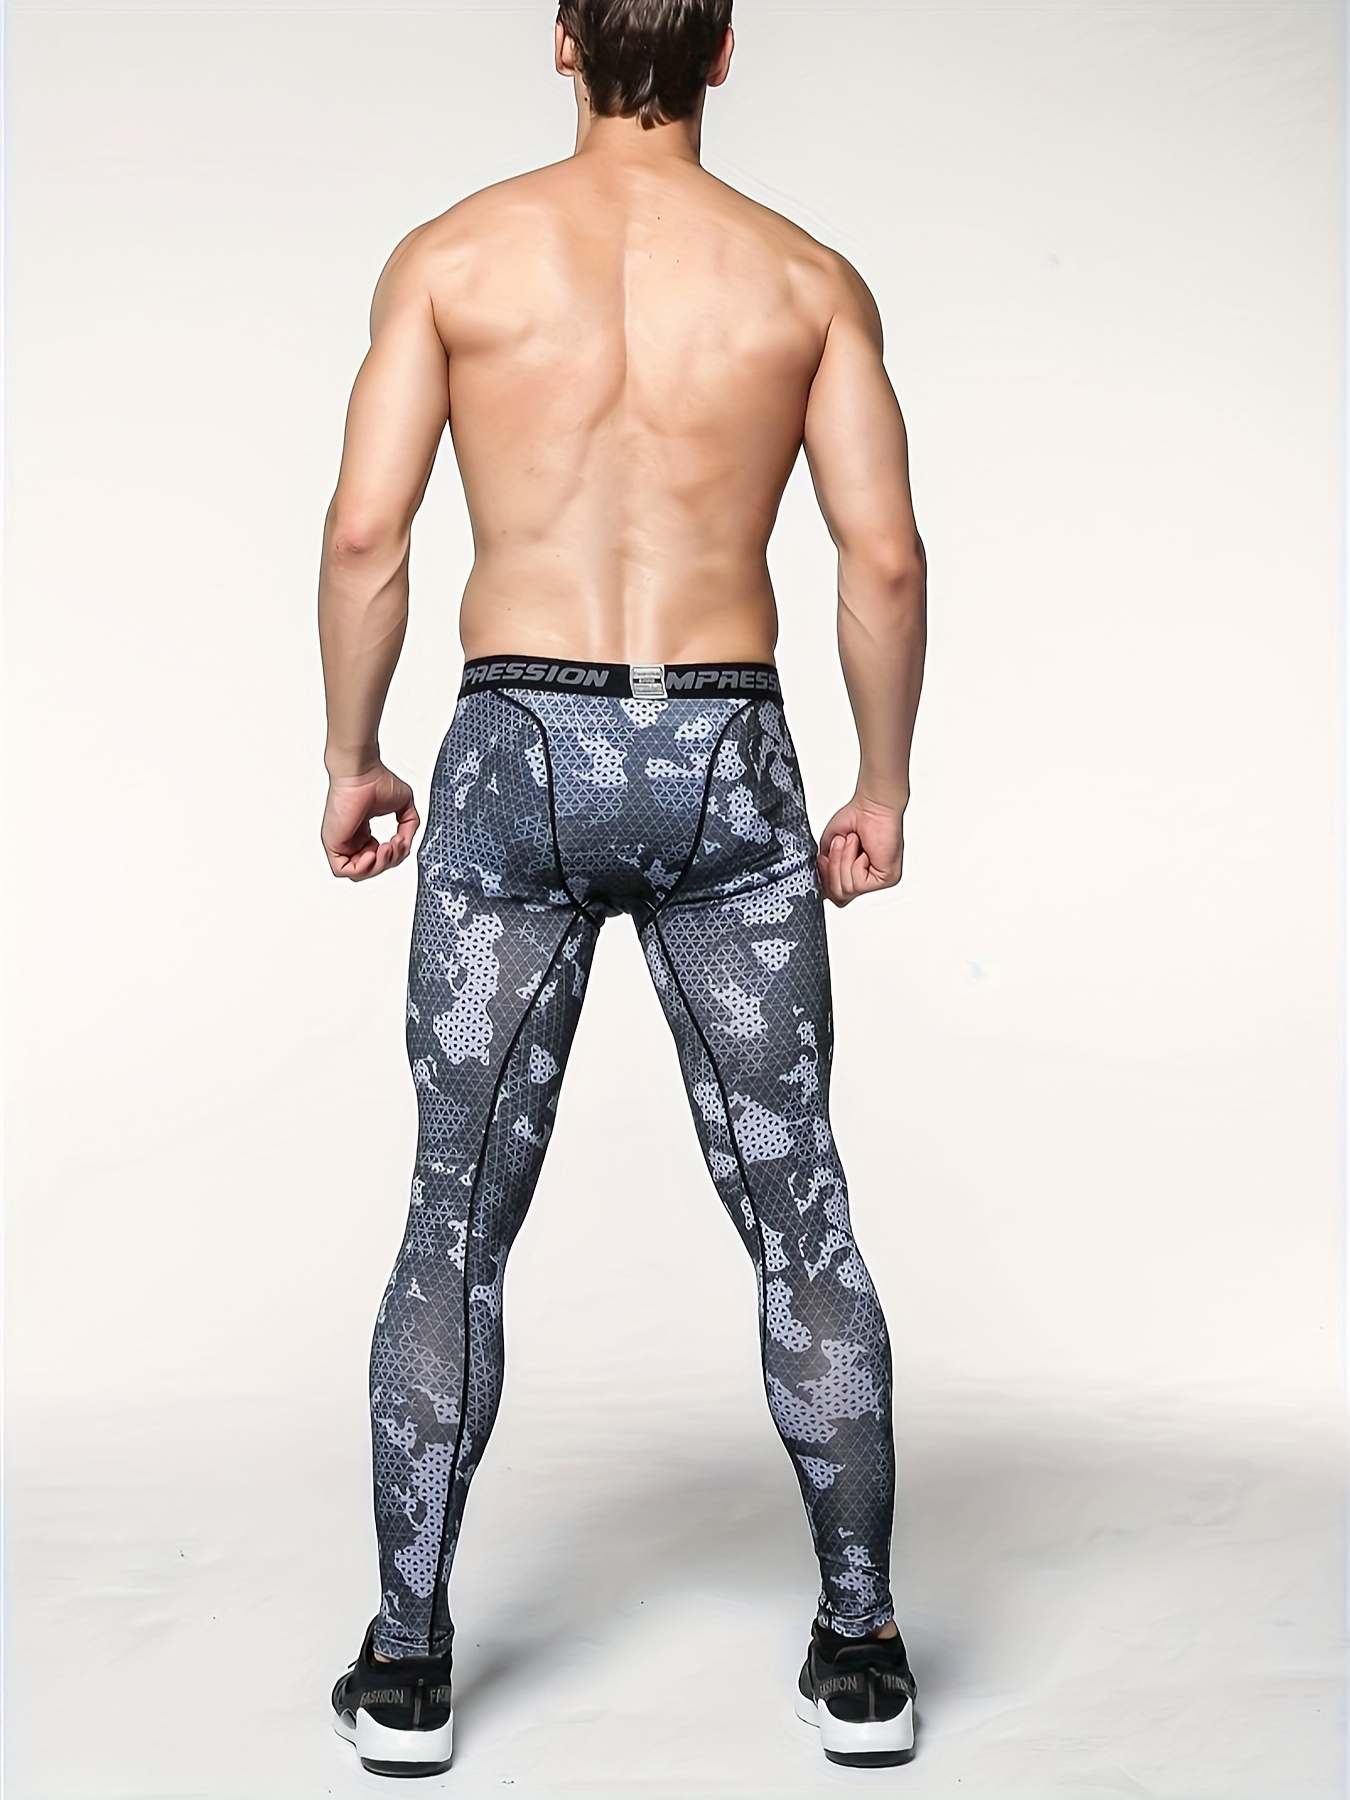 Men's Stretch Tight Long Compression Pants Activewear Letter